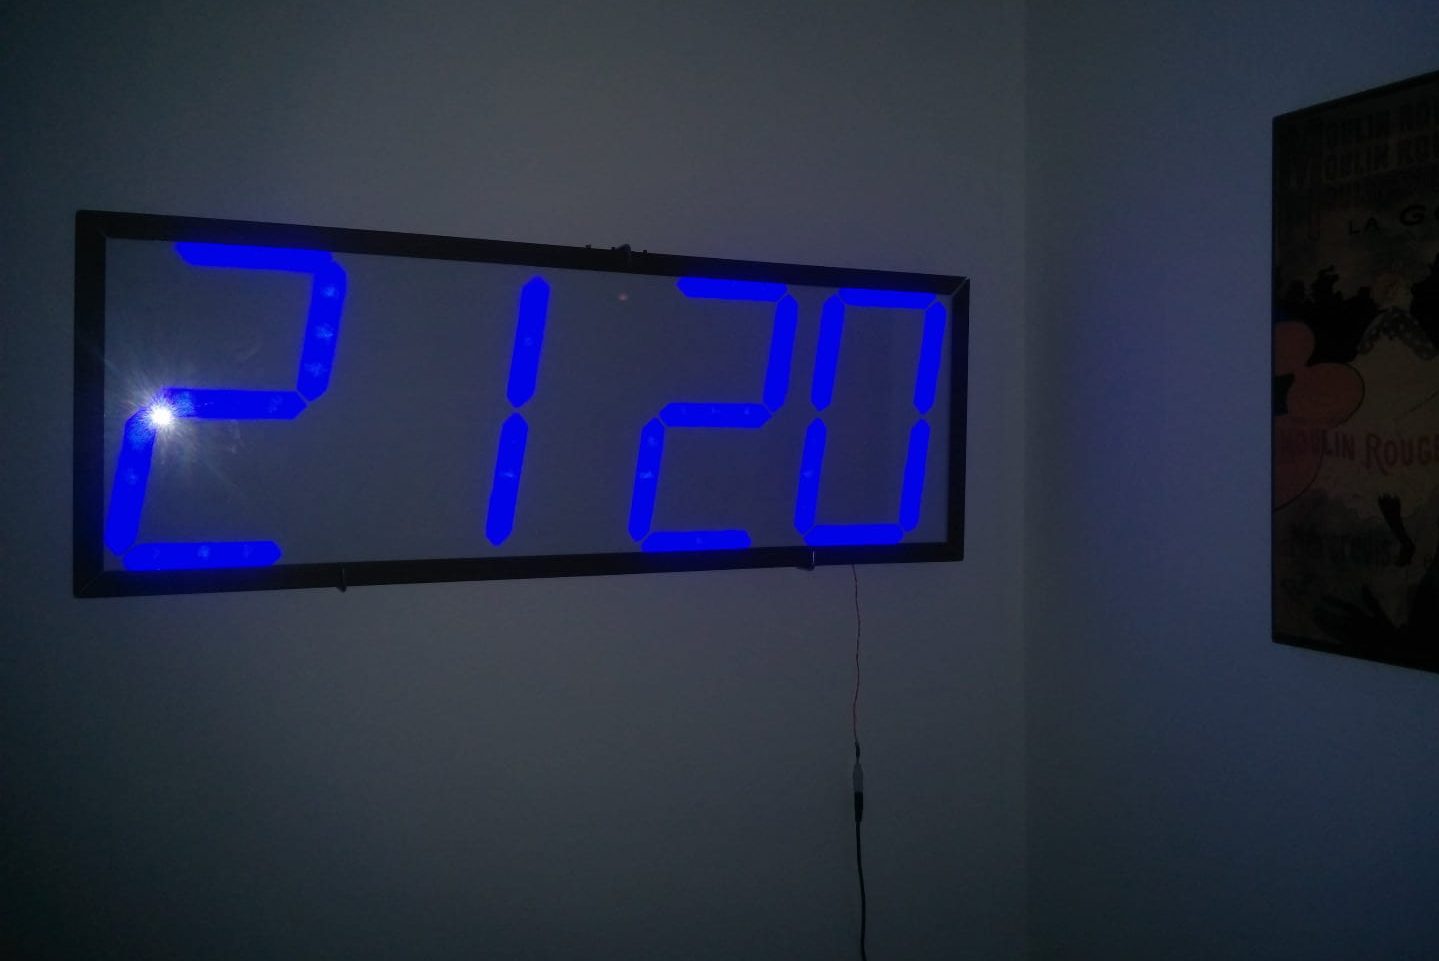  Price Digital Clock + Wholesale buying and selling 